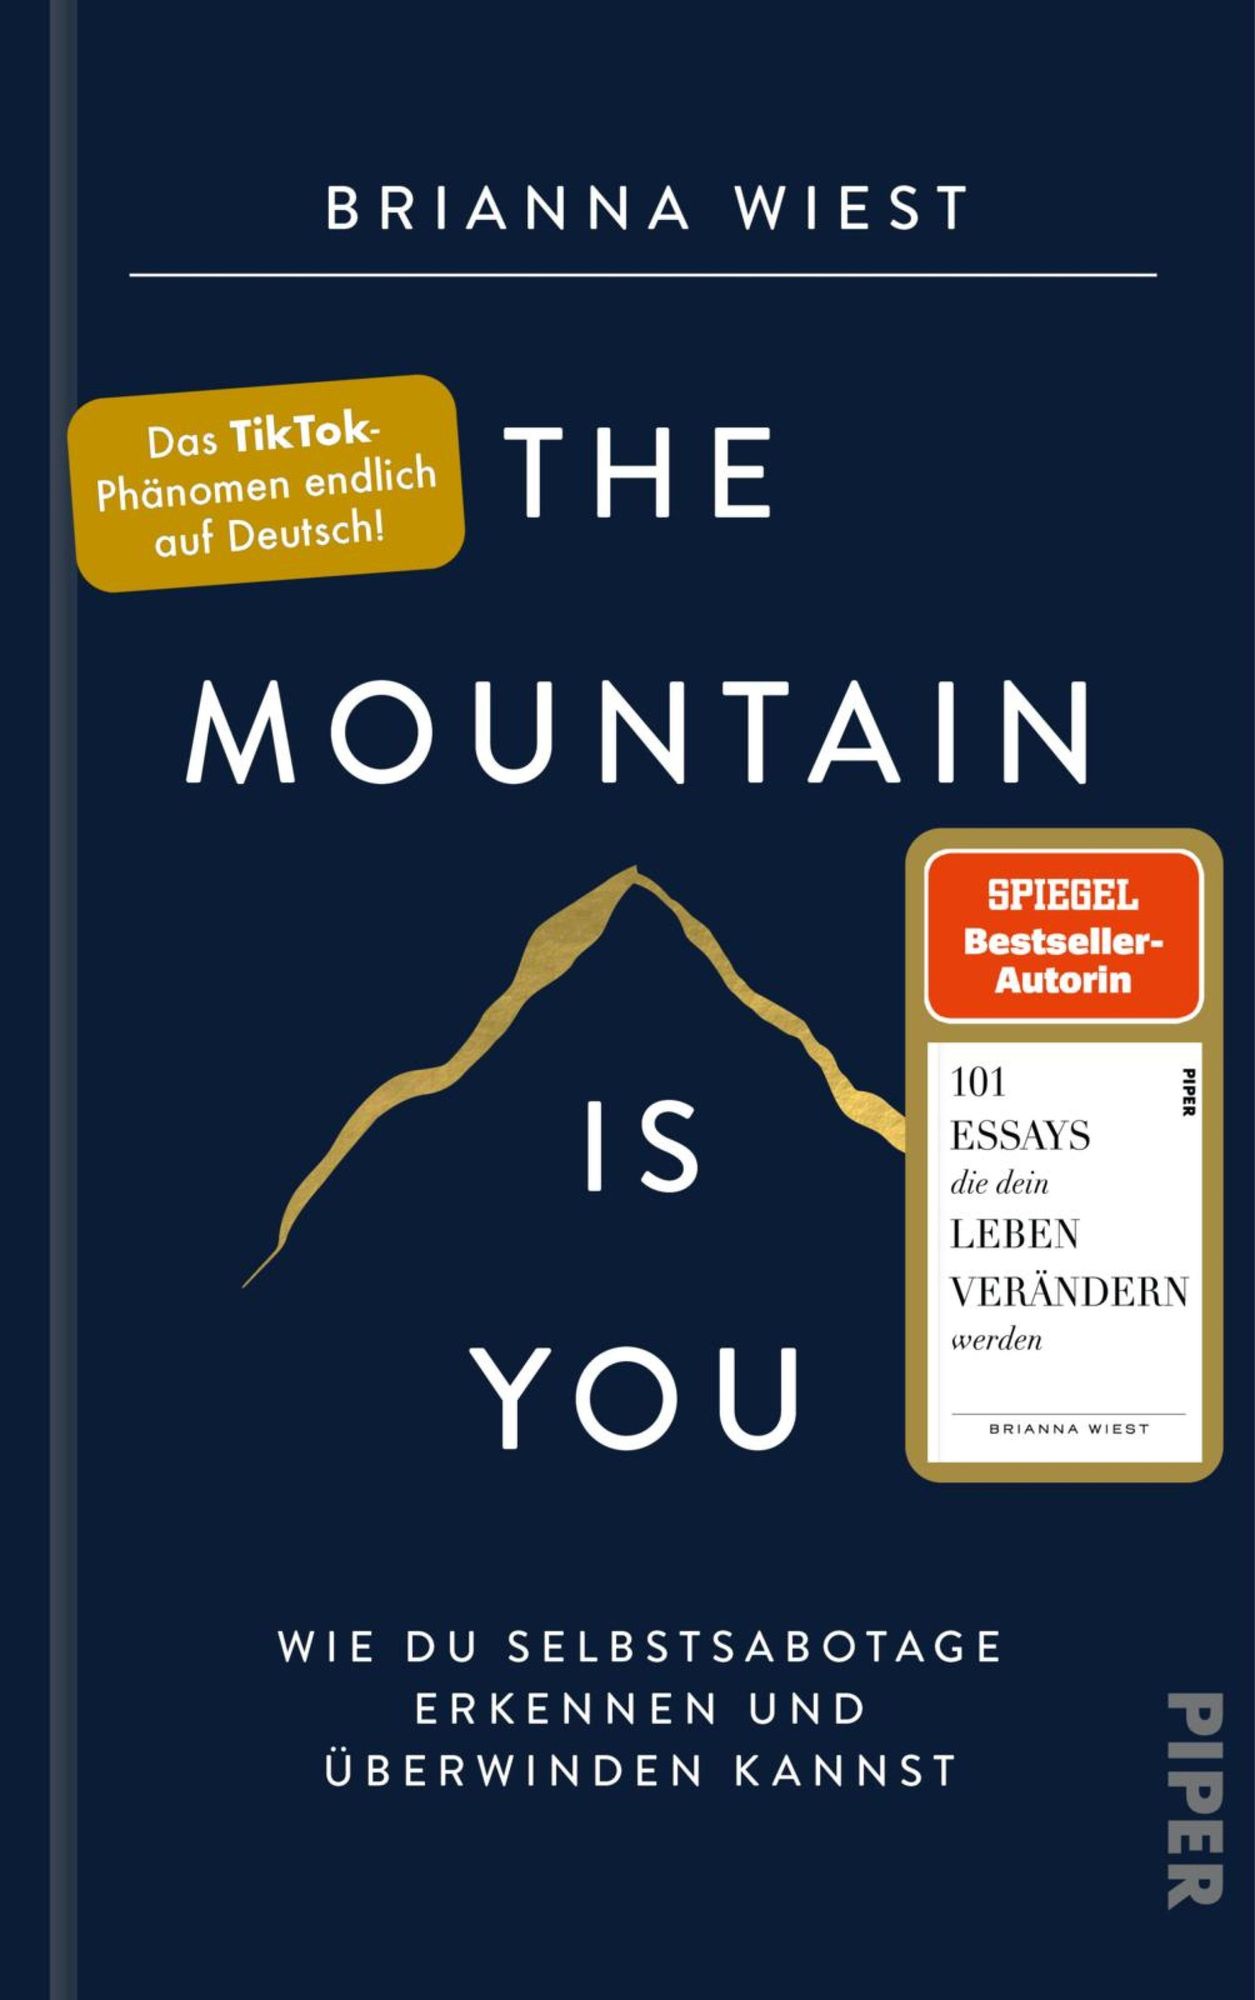 brianna wiest the mountain is you